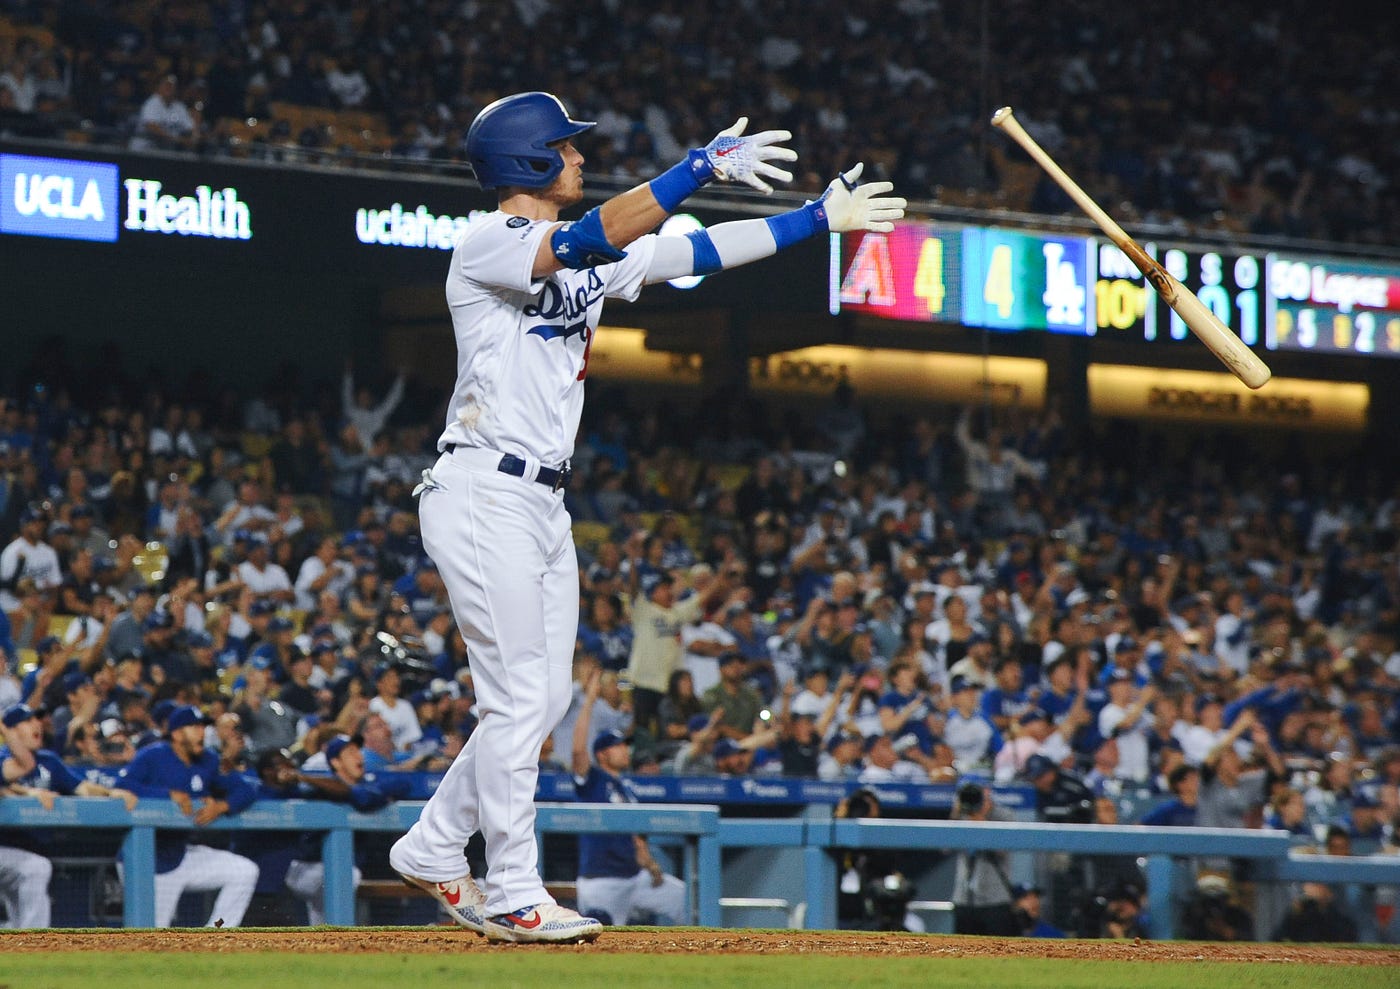 Cody Bellinger named National League Player of the Month for July